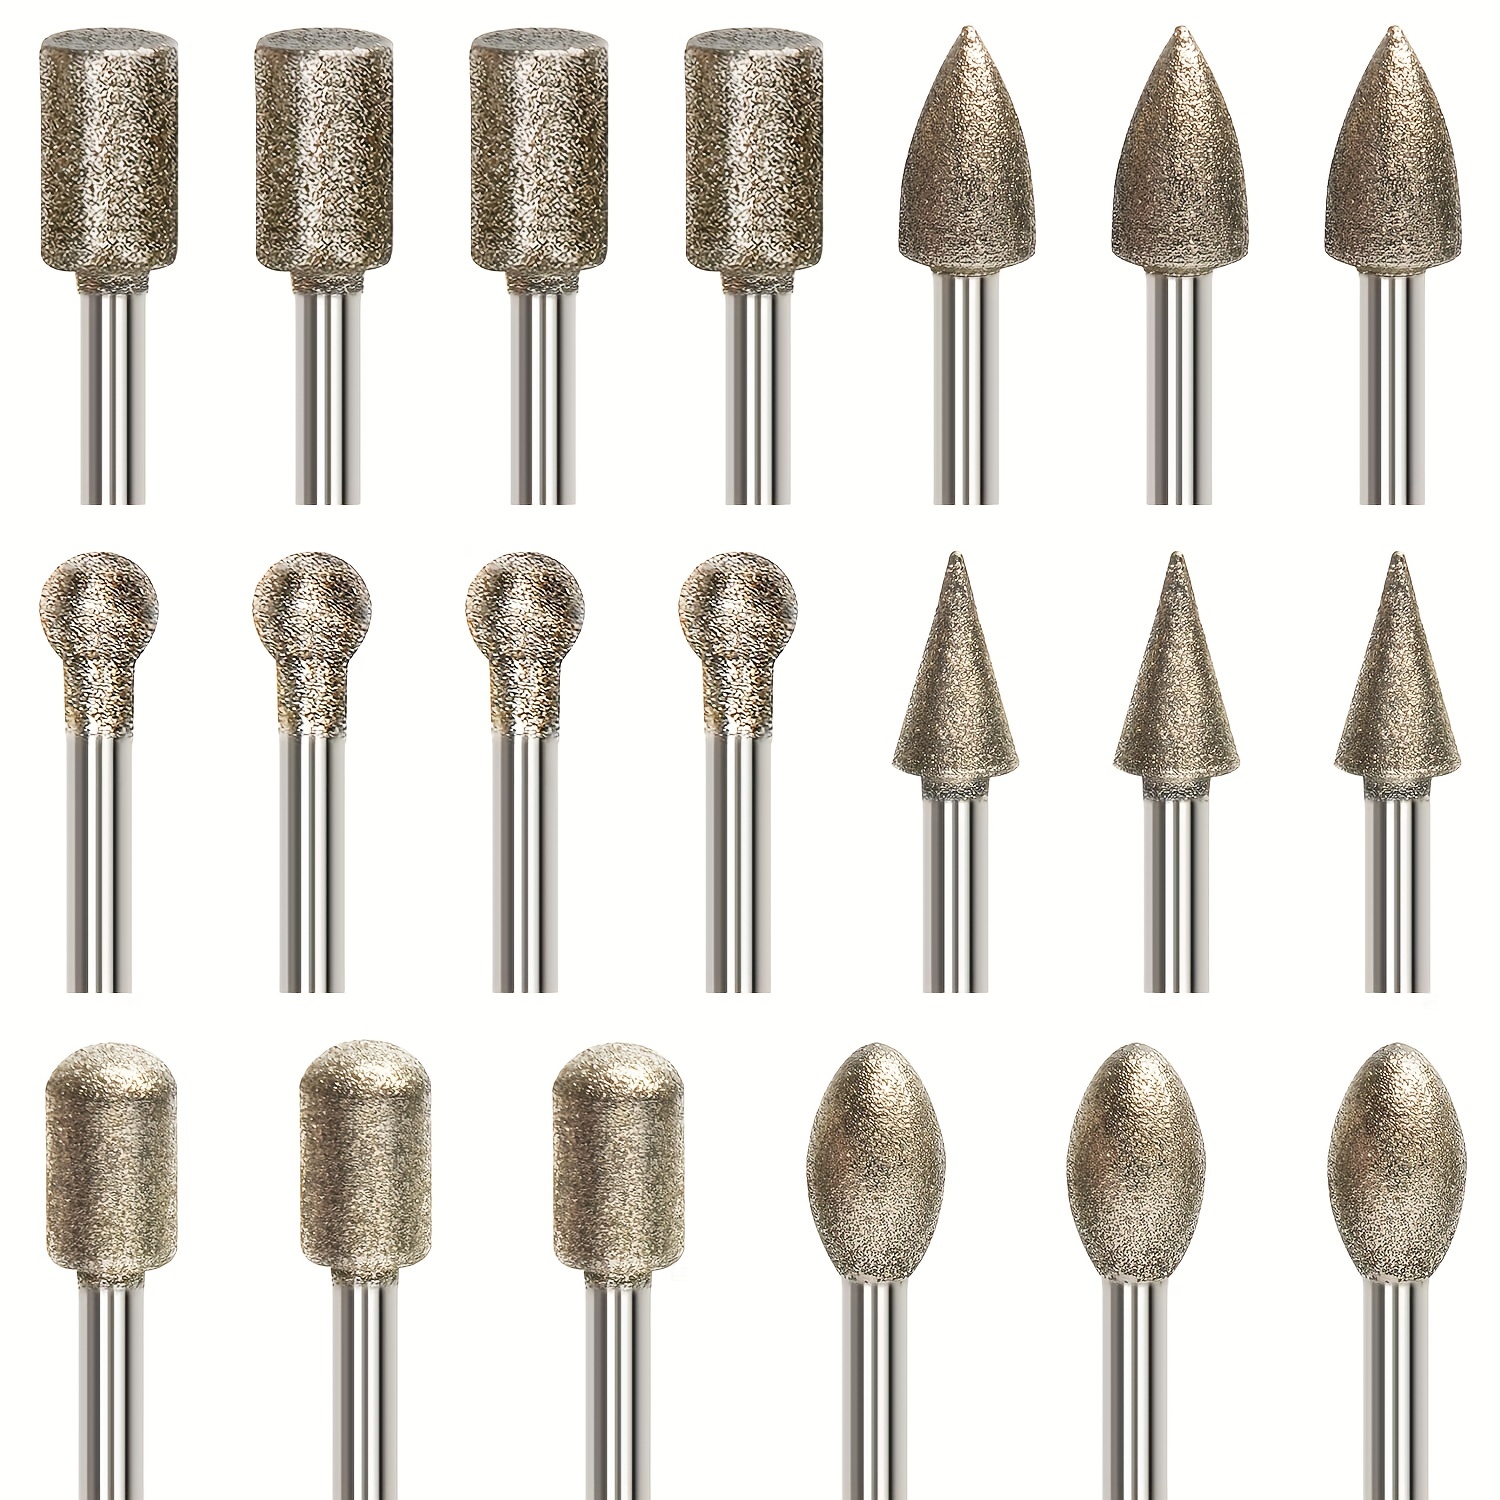 CNC Diamond Stone Carving Tools Milling Cutter Granite Engraving Bits Tool  For Marble Stone Carving